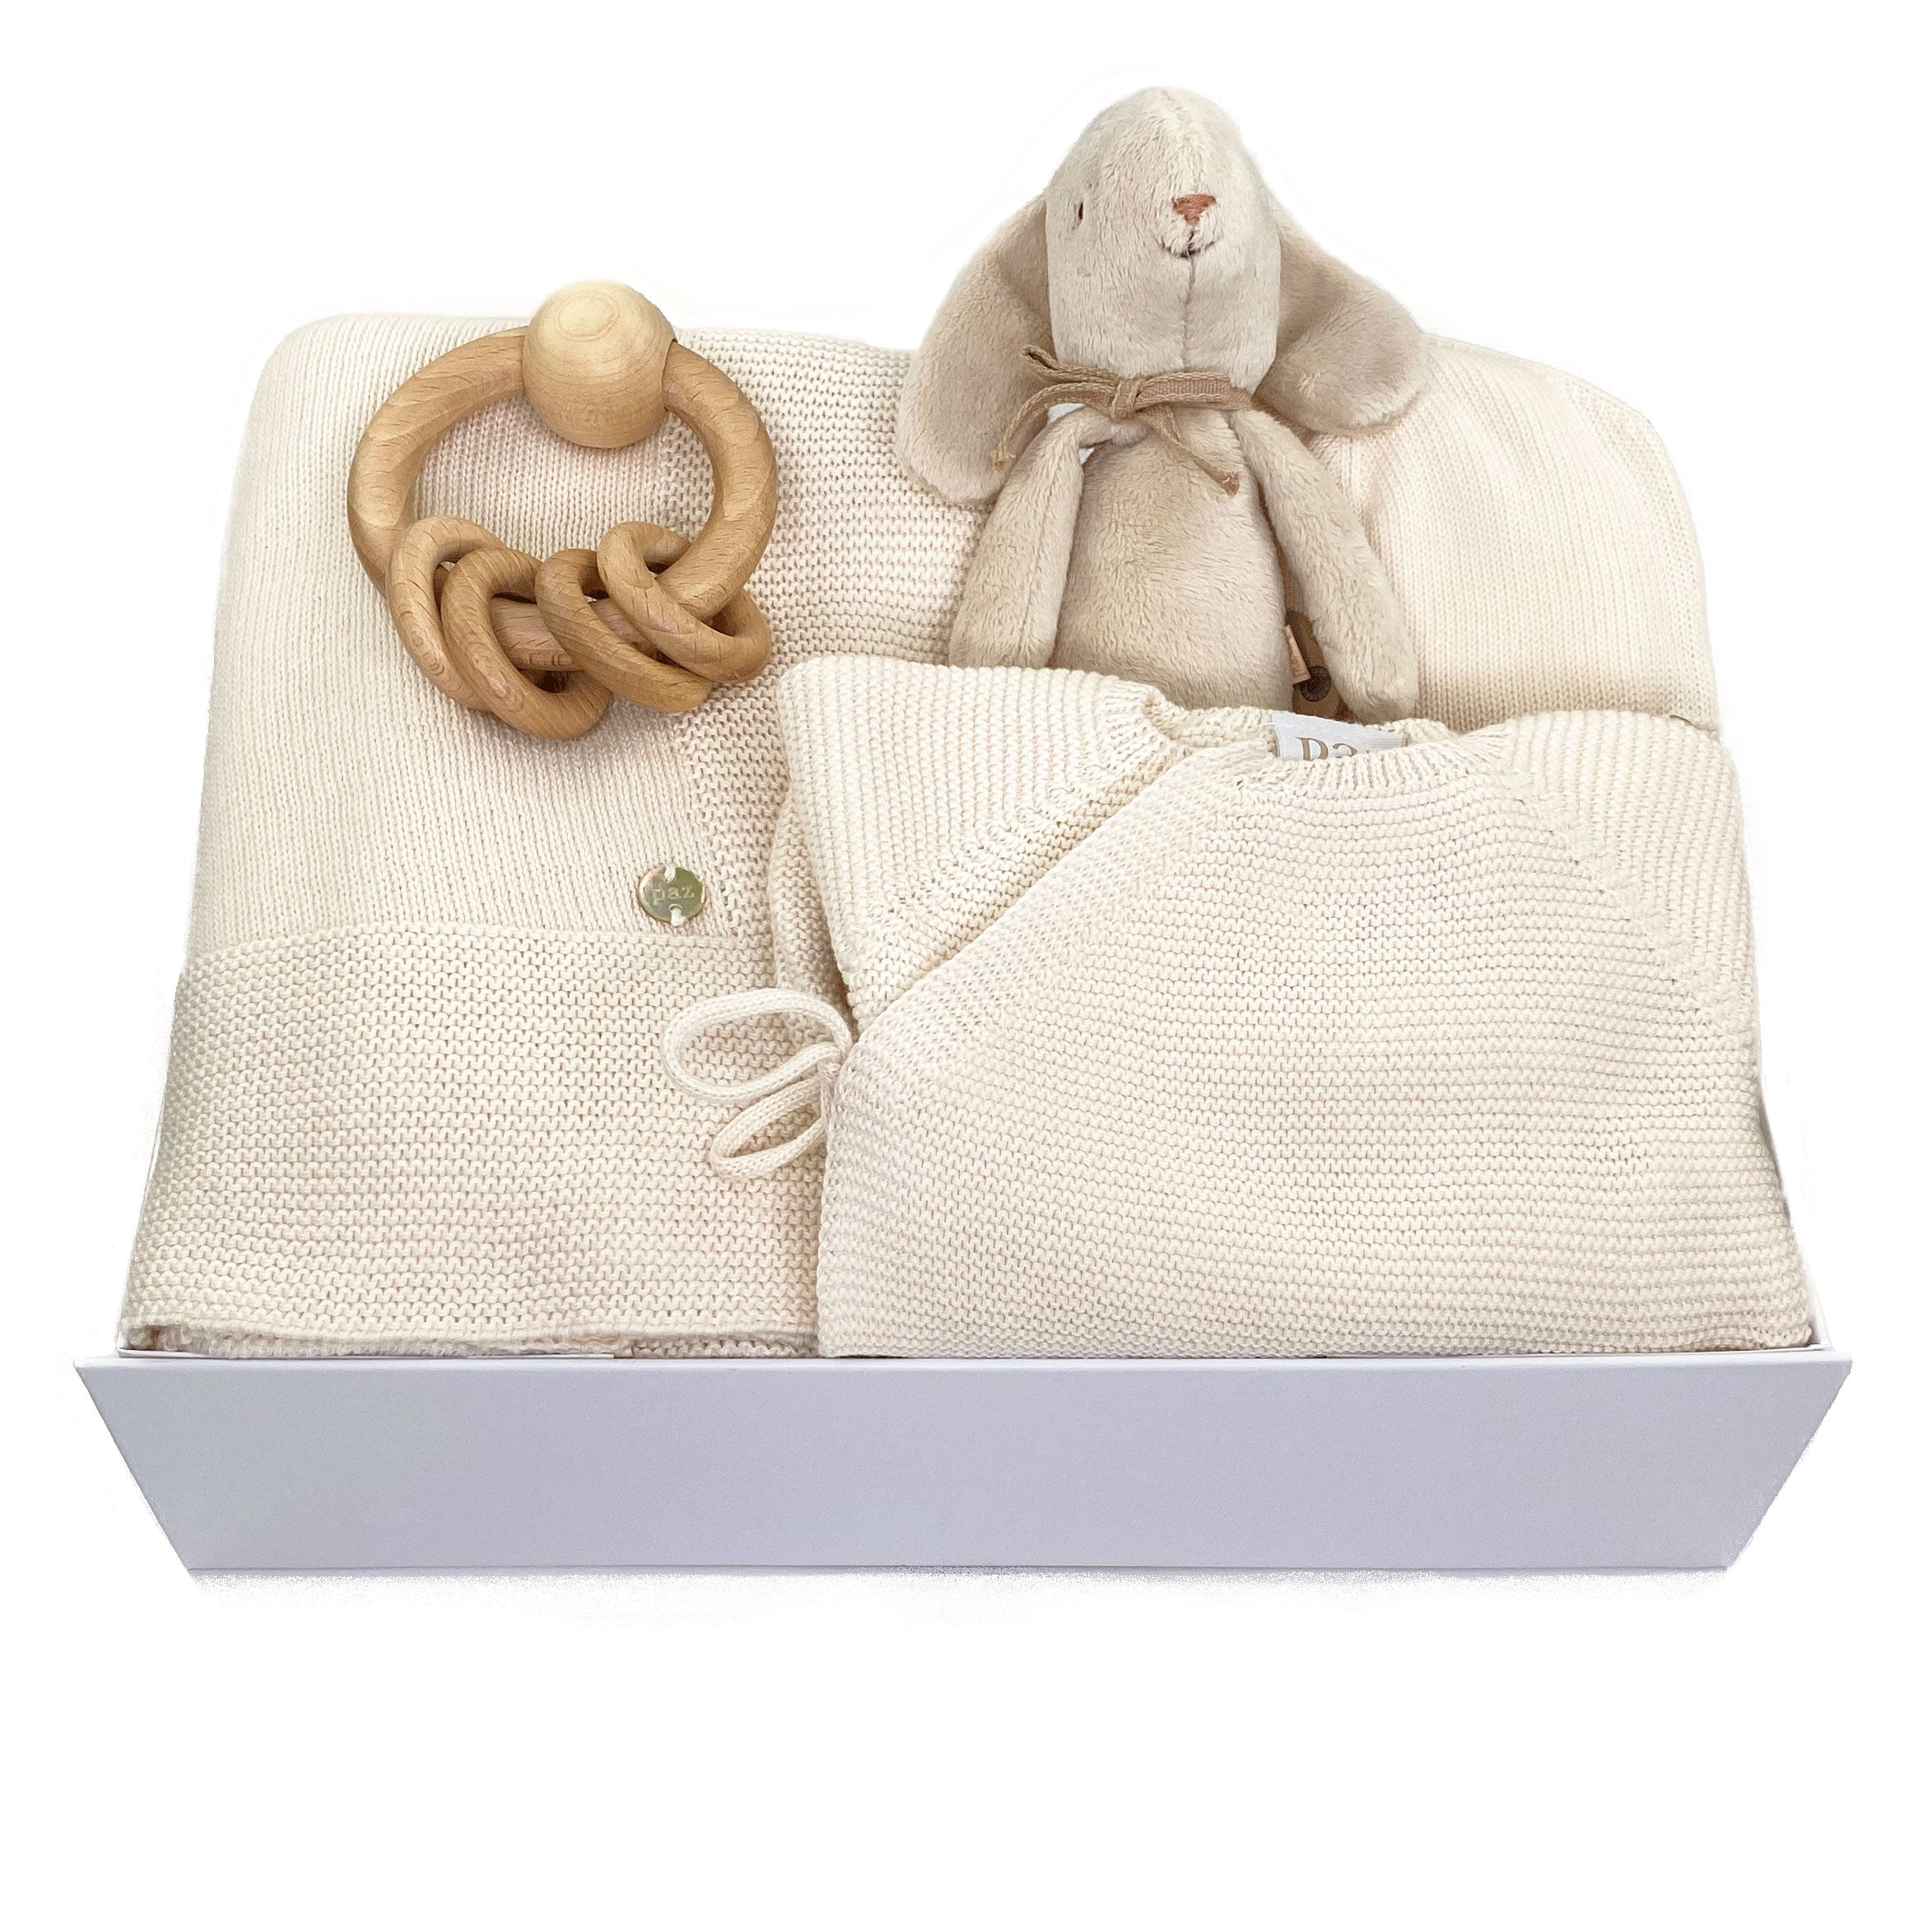 Paz Rodriguez 4 piece knitted baby gift in natural colour with a lovely bunny by Maileg and a wooden rattle by Heimess at Bonjour Baby Baskets